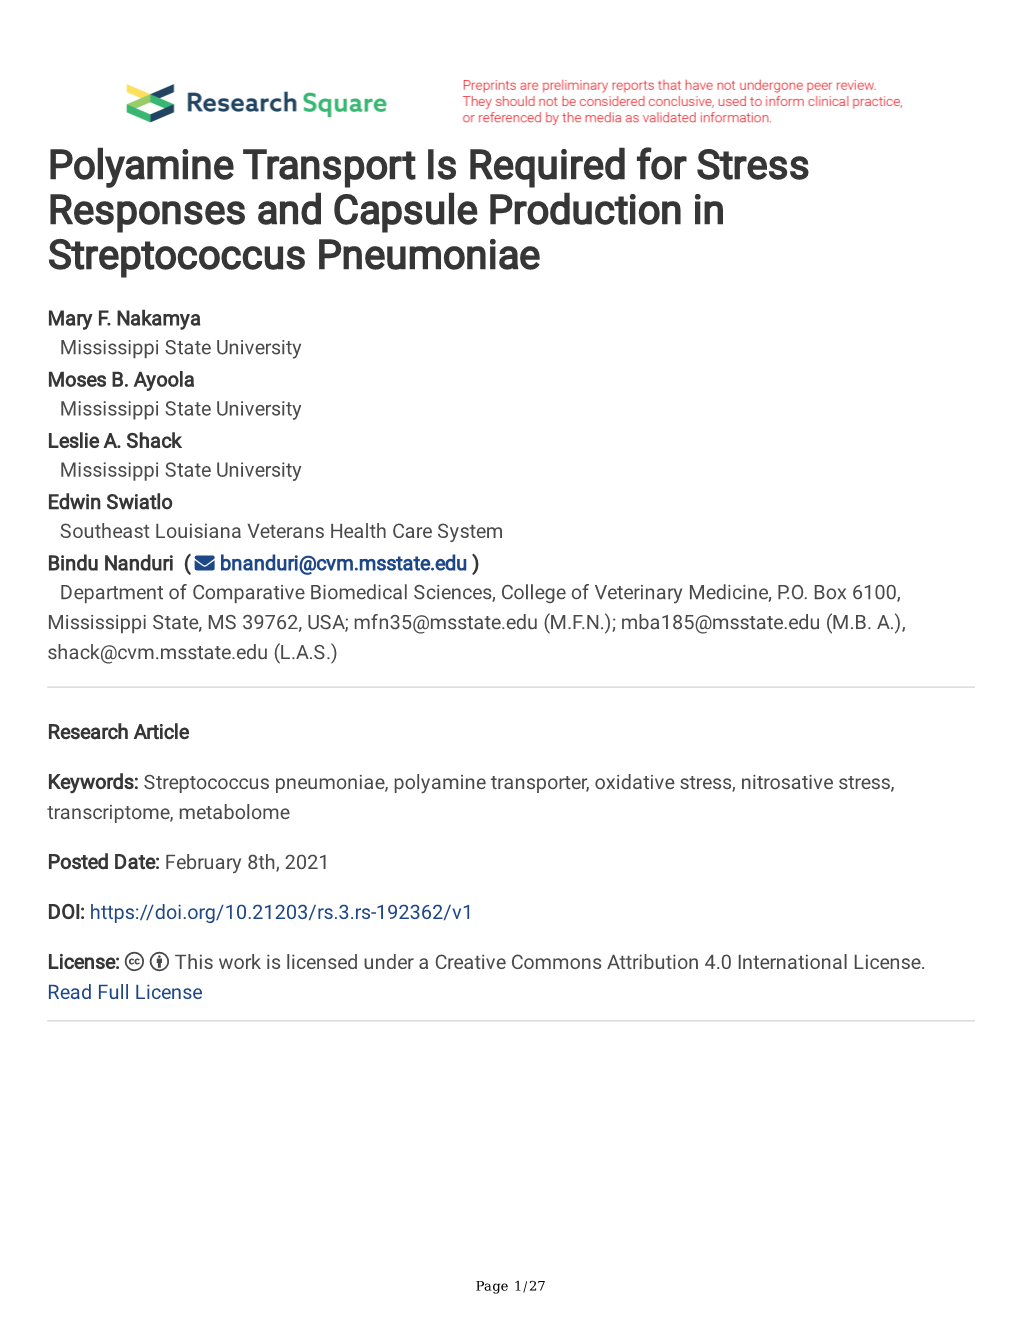 Polyamine Transport Is Required for Stress Responses and Capsule Production in Streptococcus Pneumoniae